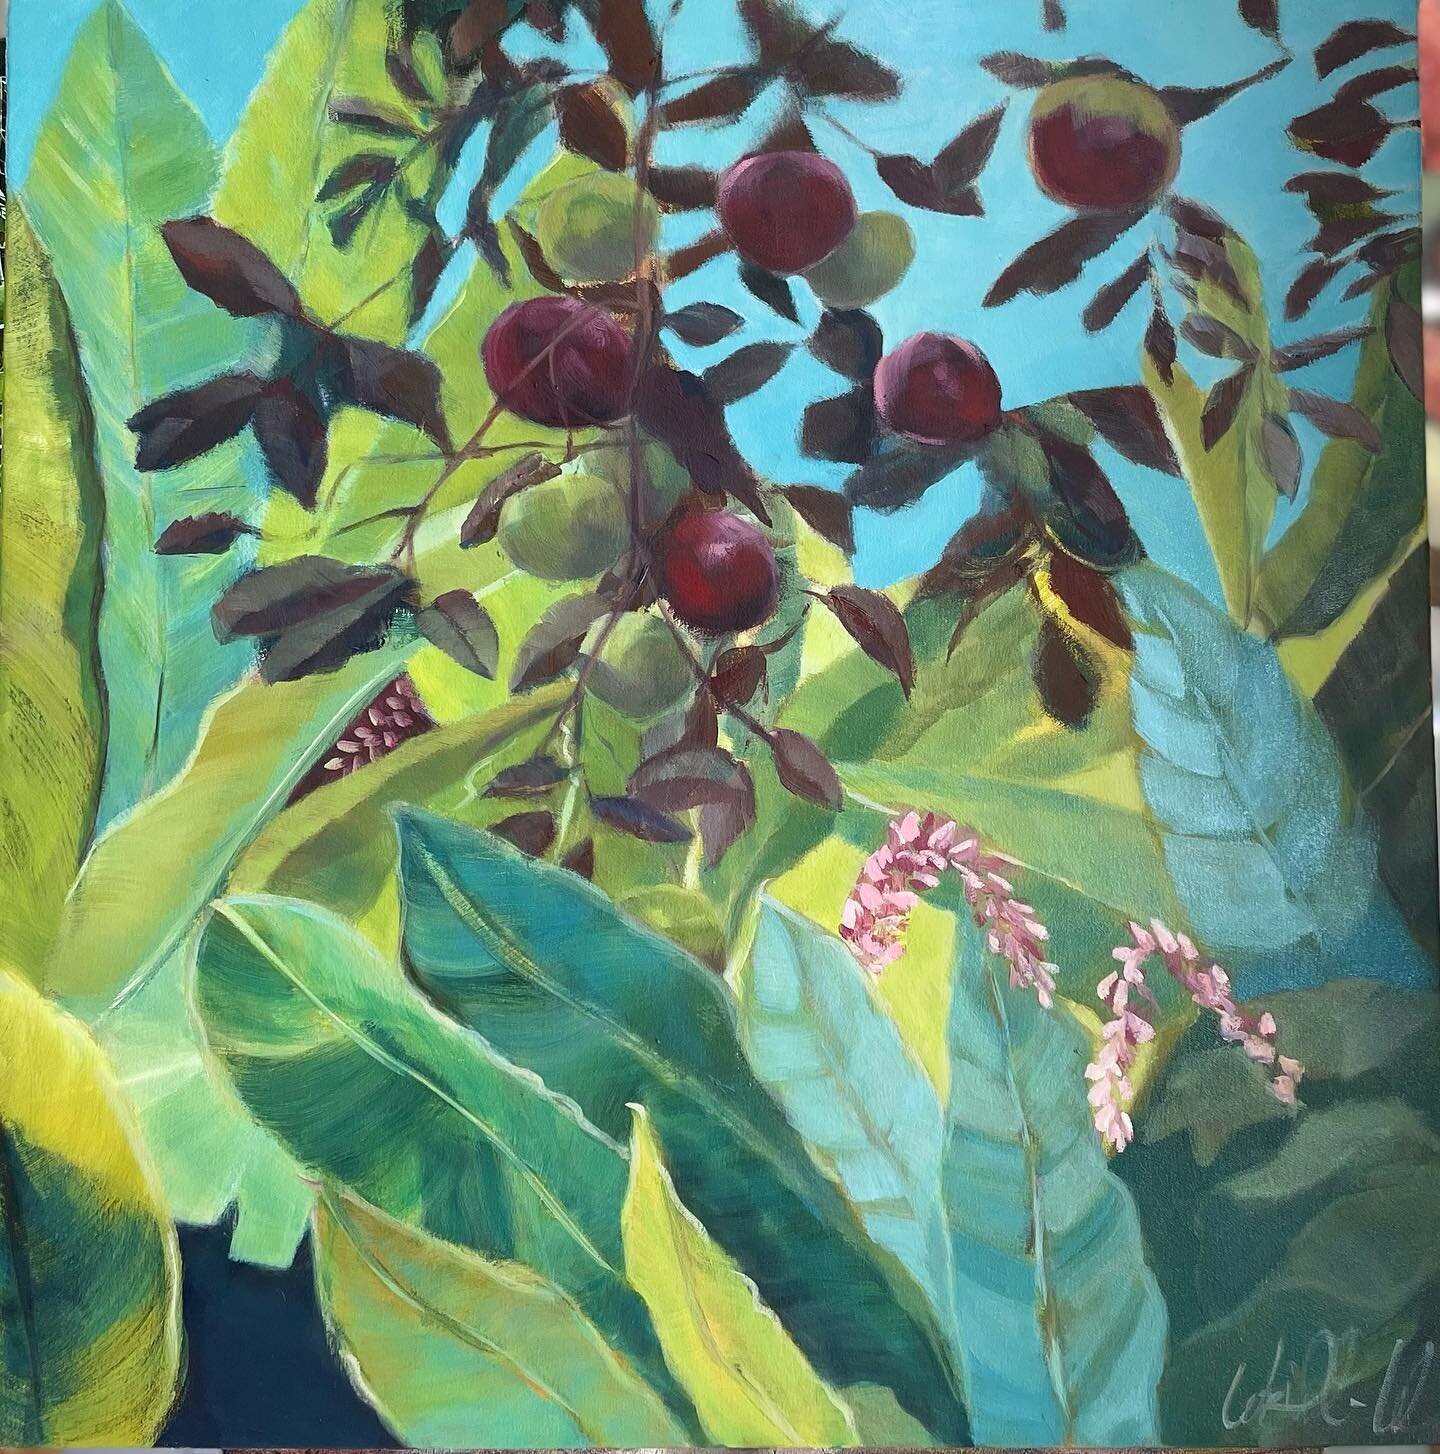 A secret garden
away from the noise of life
leaves flutter
sunlight dapples
so very quiet 
every plant has its own glory
alone and yet surrounded by life
light falling
patterns changing 
my garden 60x60 oil on canvas #availablewrightwilliamsartwork #